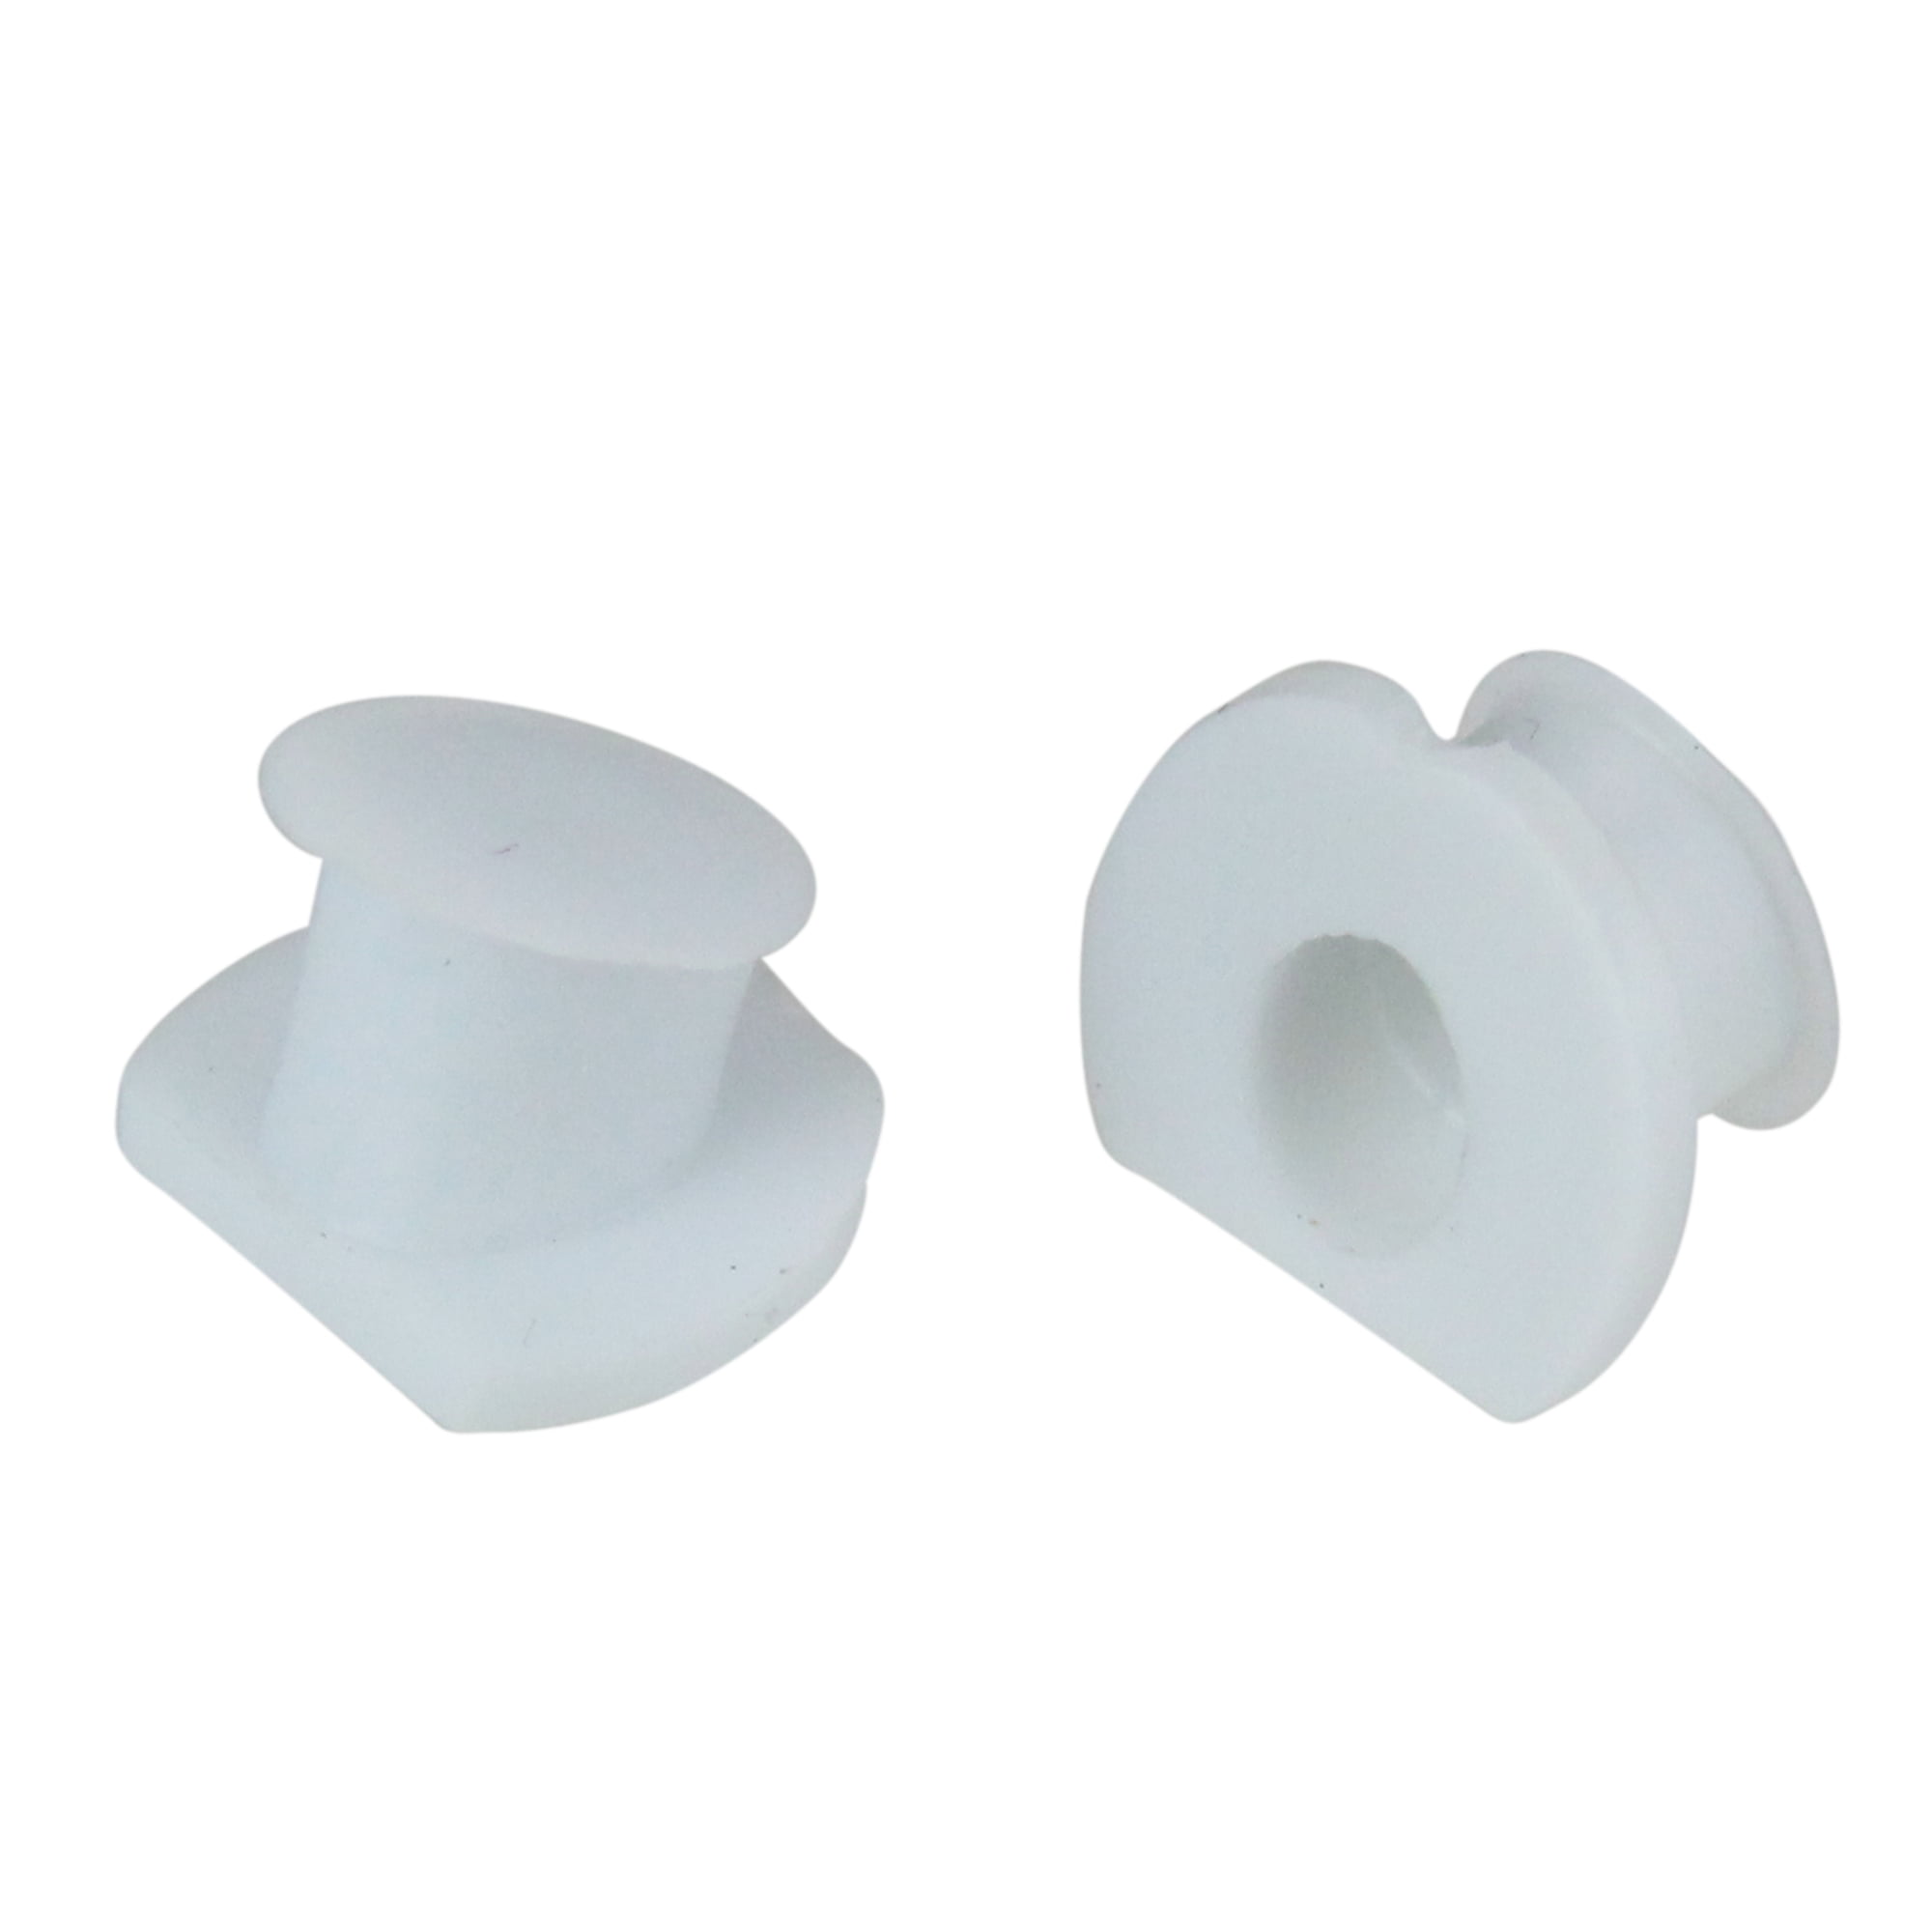 2pcs Soft Silicone Ear Plug Hearing Protector Hearing For Swimming Sleeping Nz 